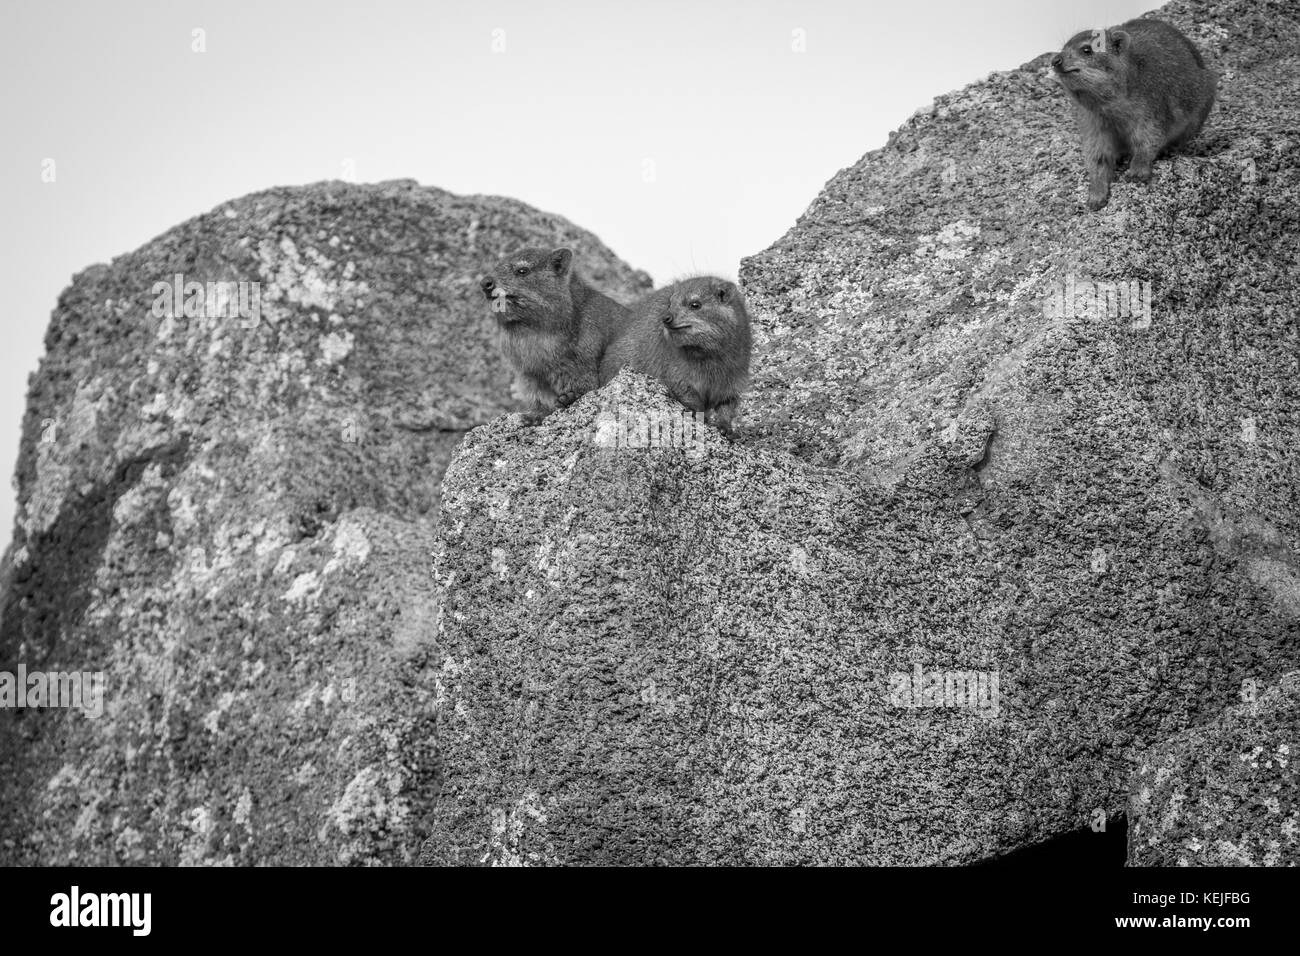 Rock hyrax sitting on rocks in black and white in the Pilanesberg National Park, South Africa. Stock Photo